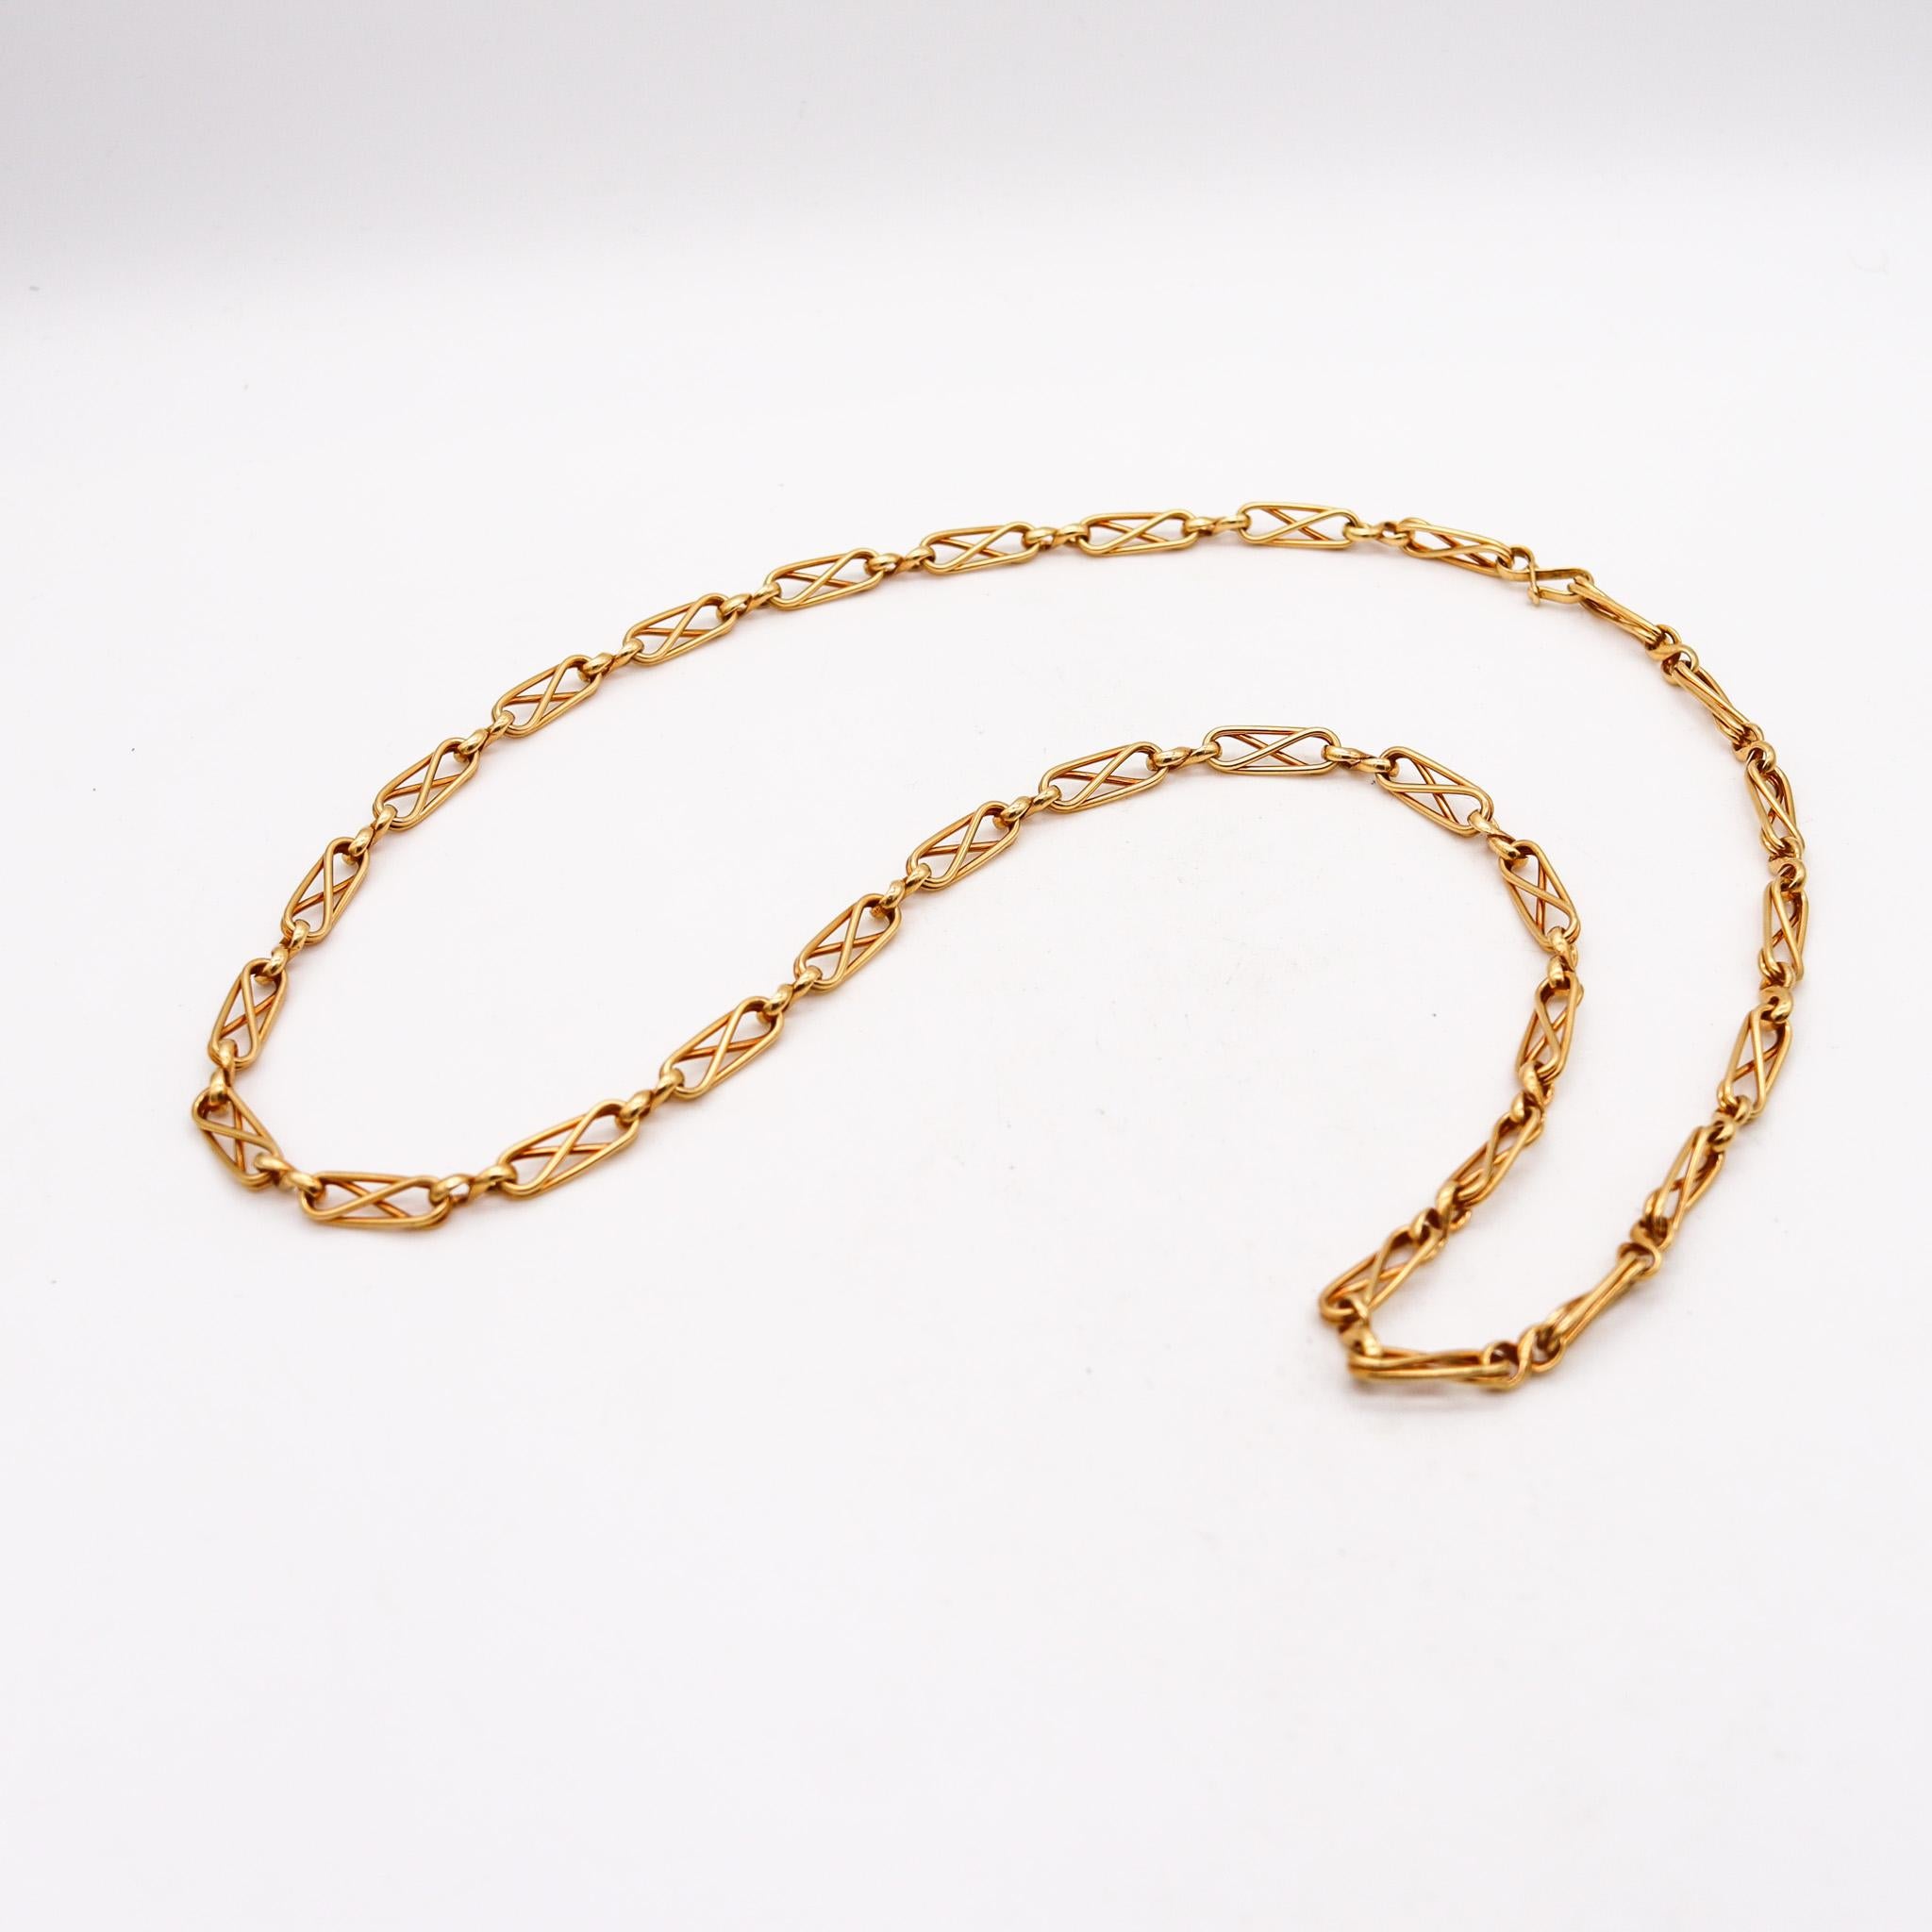 Modernist Cartier Paris 1960 George L'enfant Very Rare Geometric Chain in 18Kt Yellow Gold For Sale